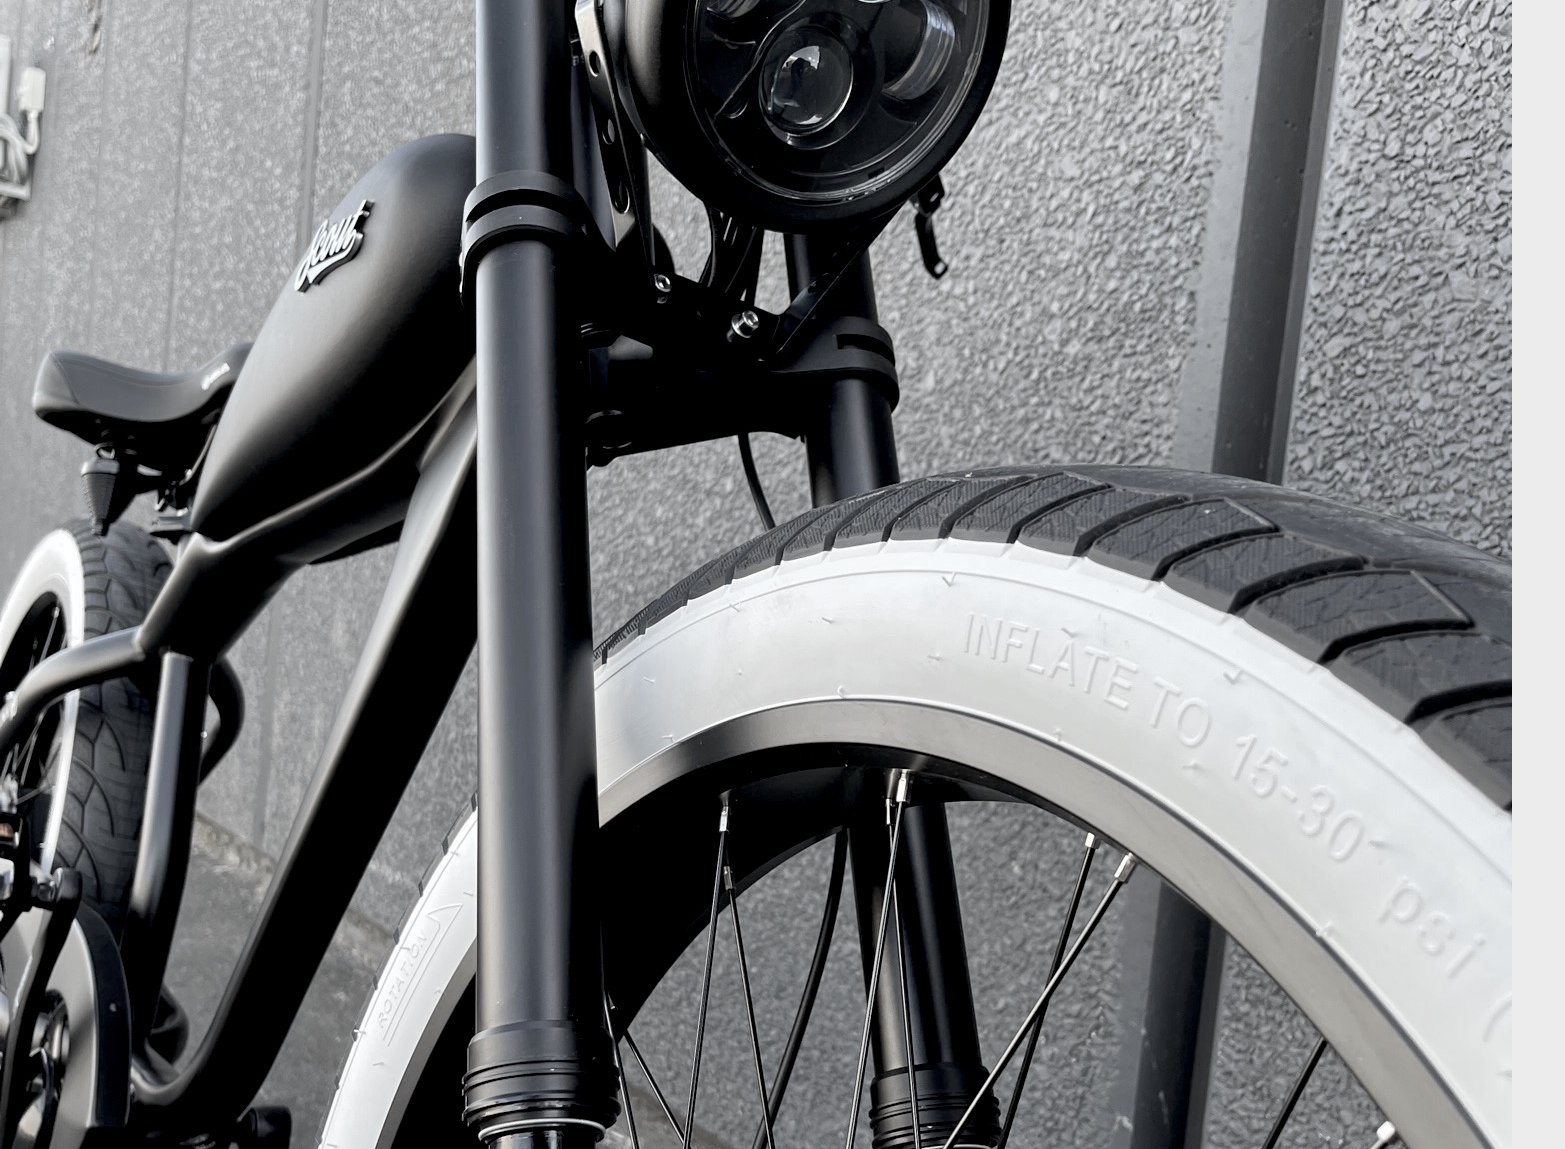 The Scout Electric Motorbike from Boostbikes pays homage to track motorcycles of the early 1900s with fat tyres for on or off road, forest tracks, beaches and boardwalks